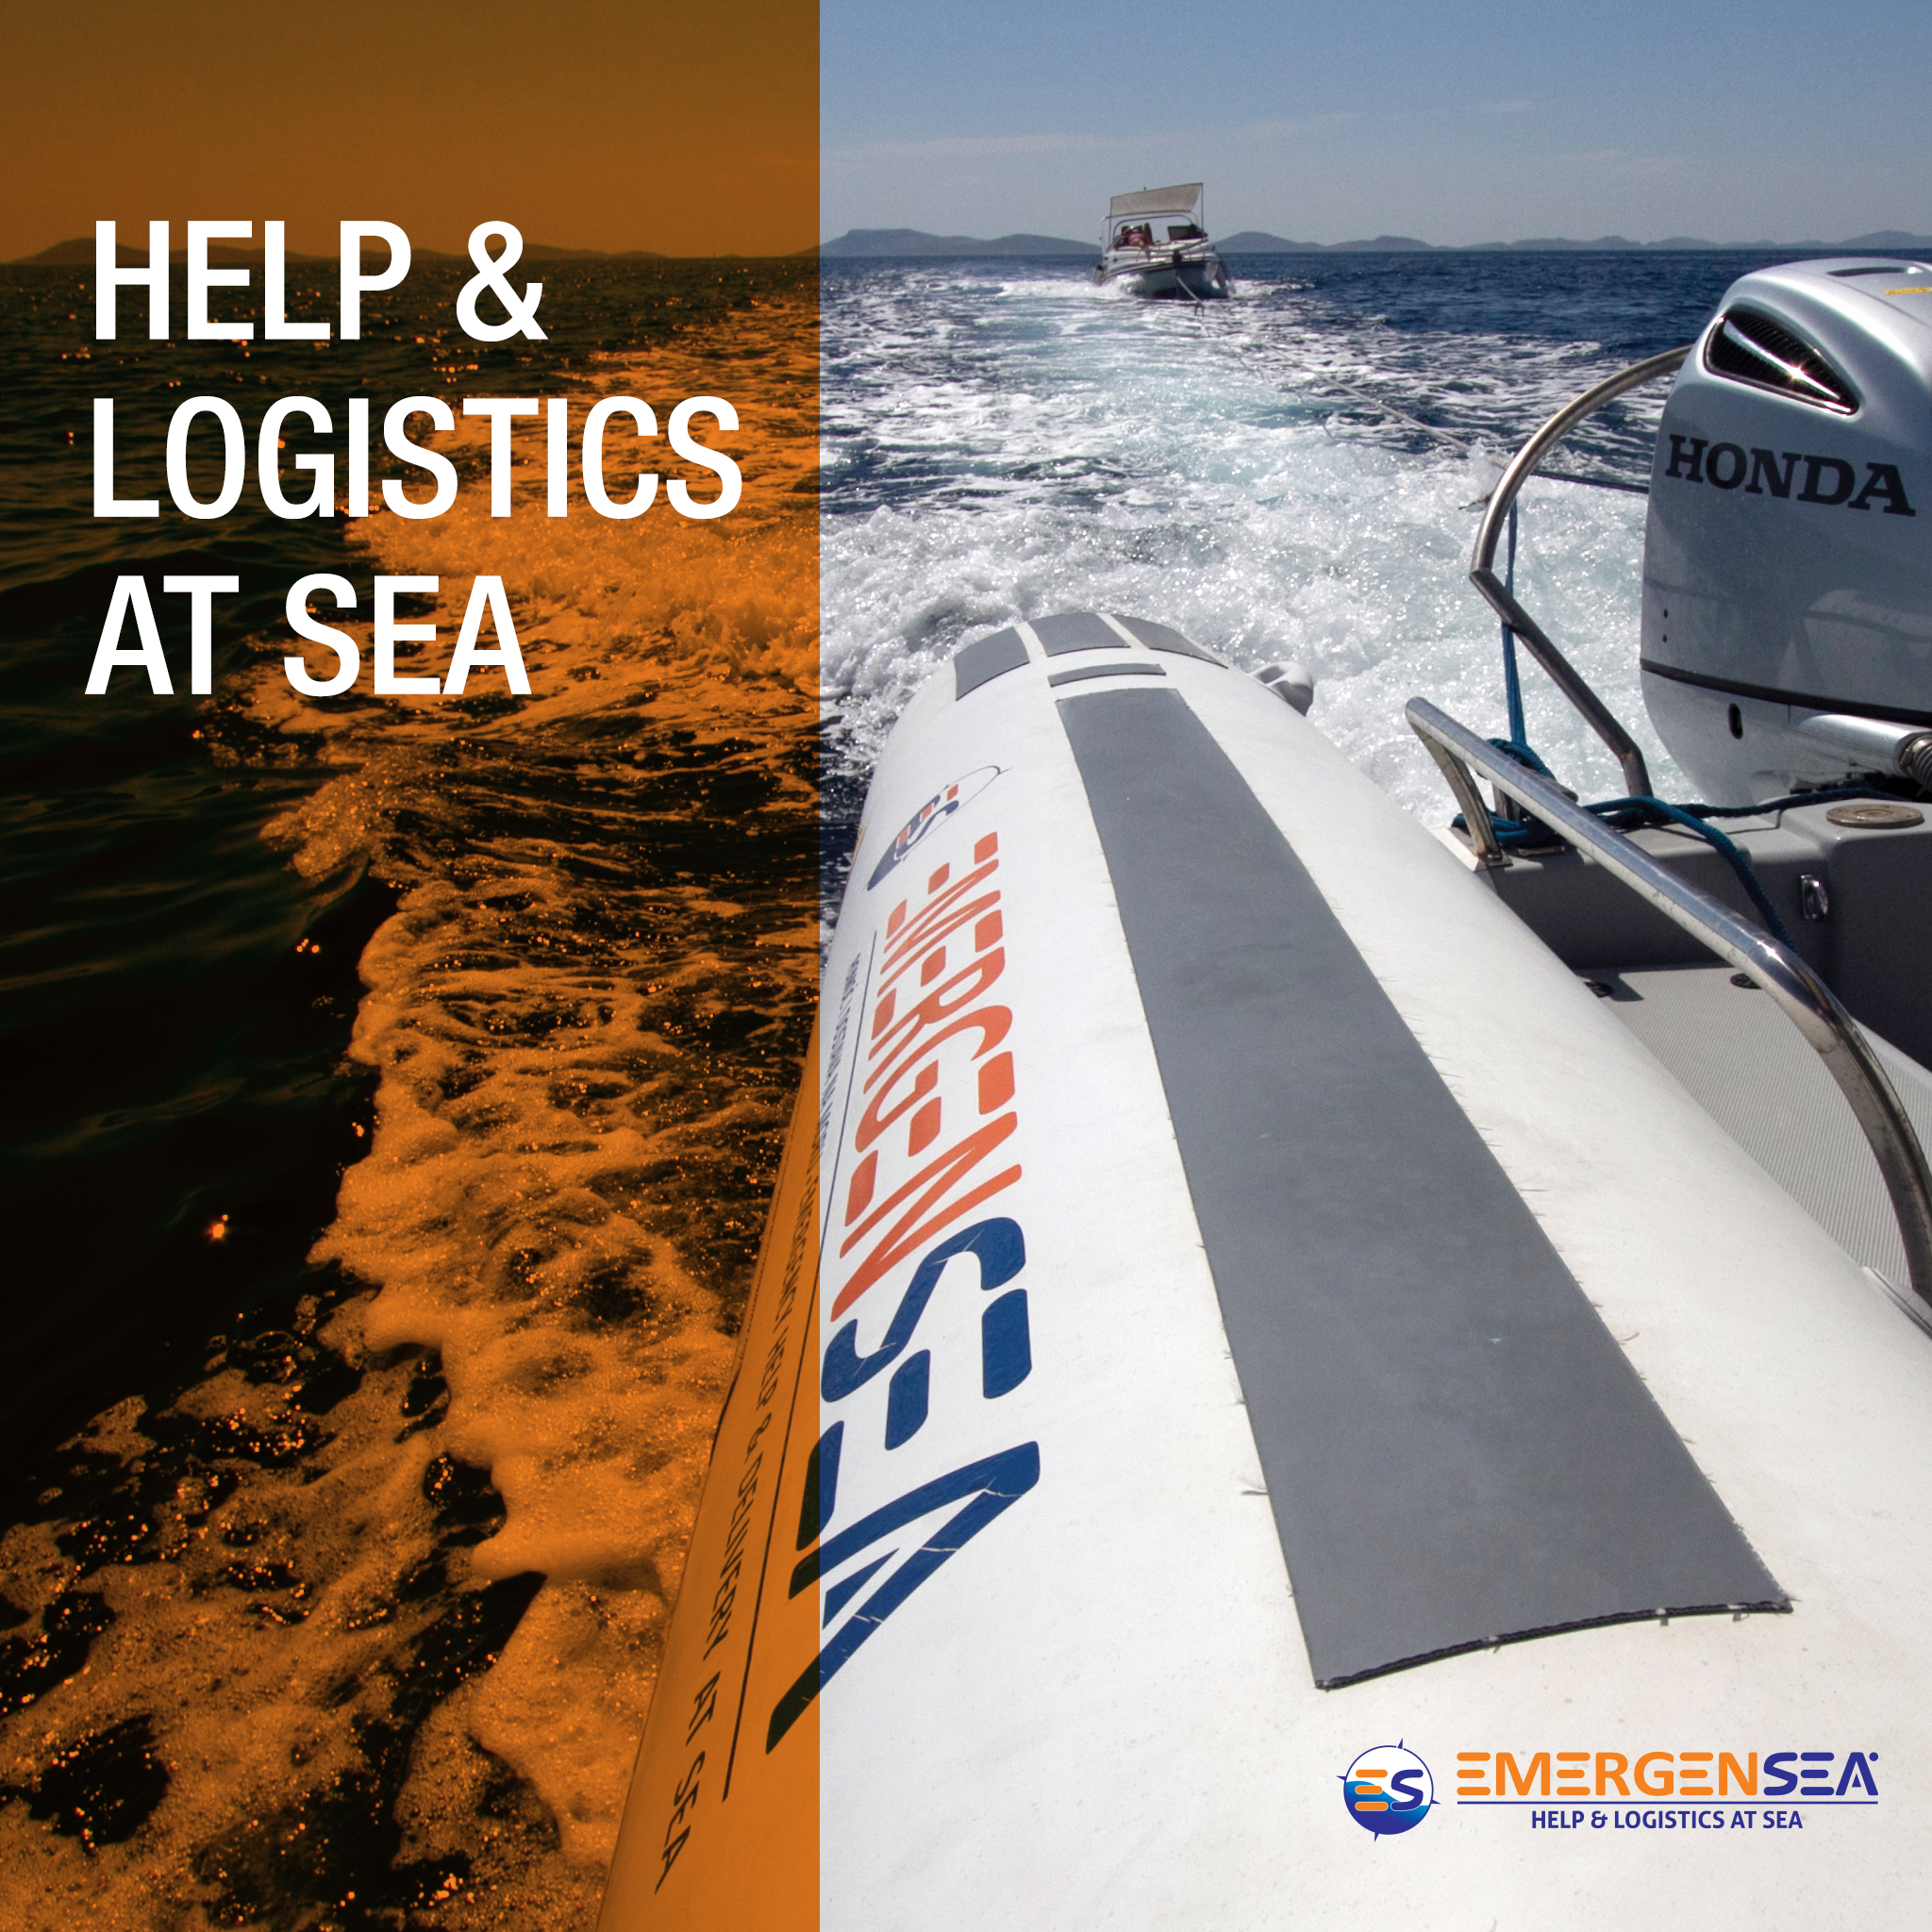 help-at-sea-call-assistance-towing-emergensea-malta-ports